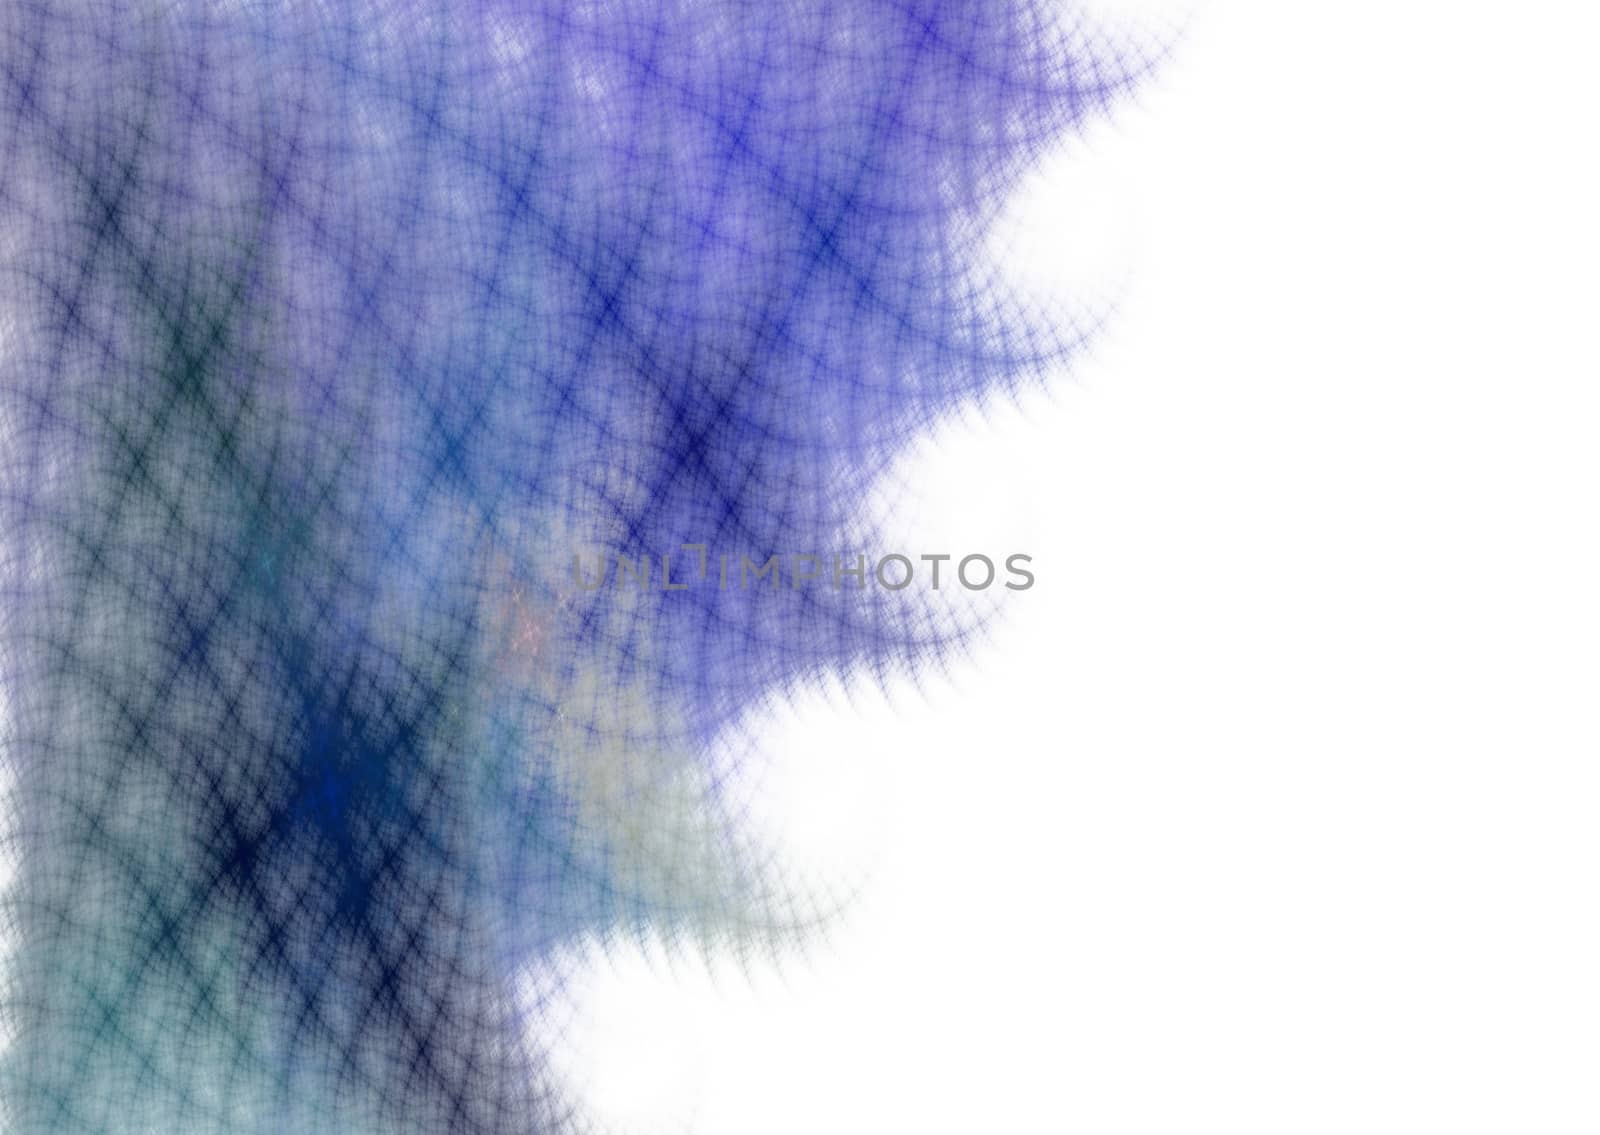 Abstract blue fractal picture on the light background